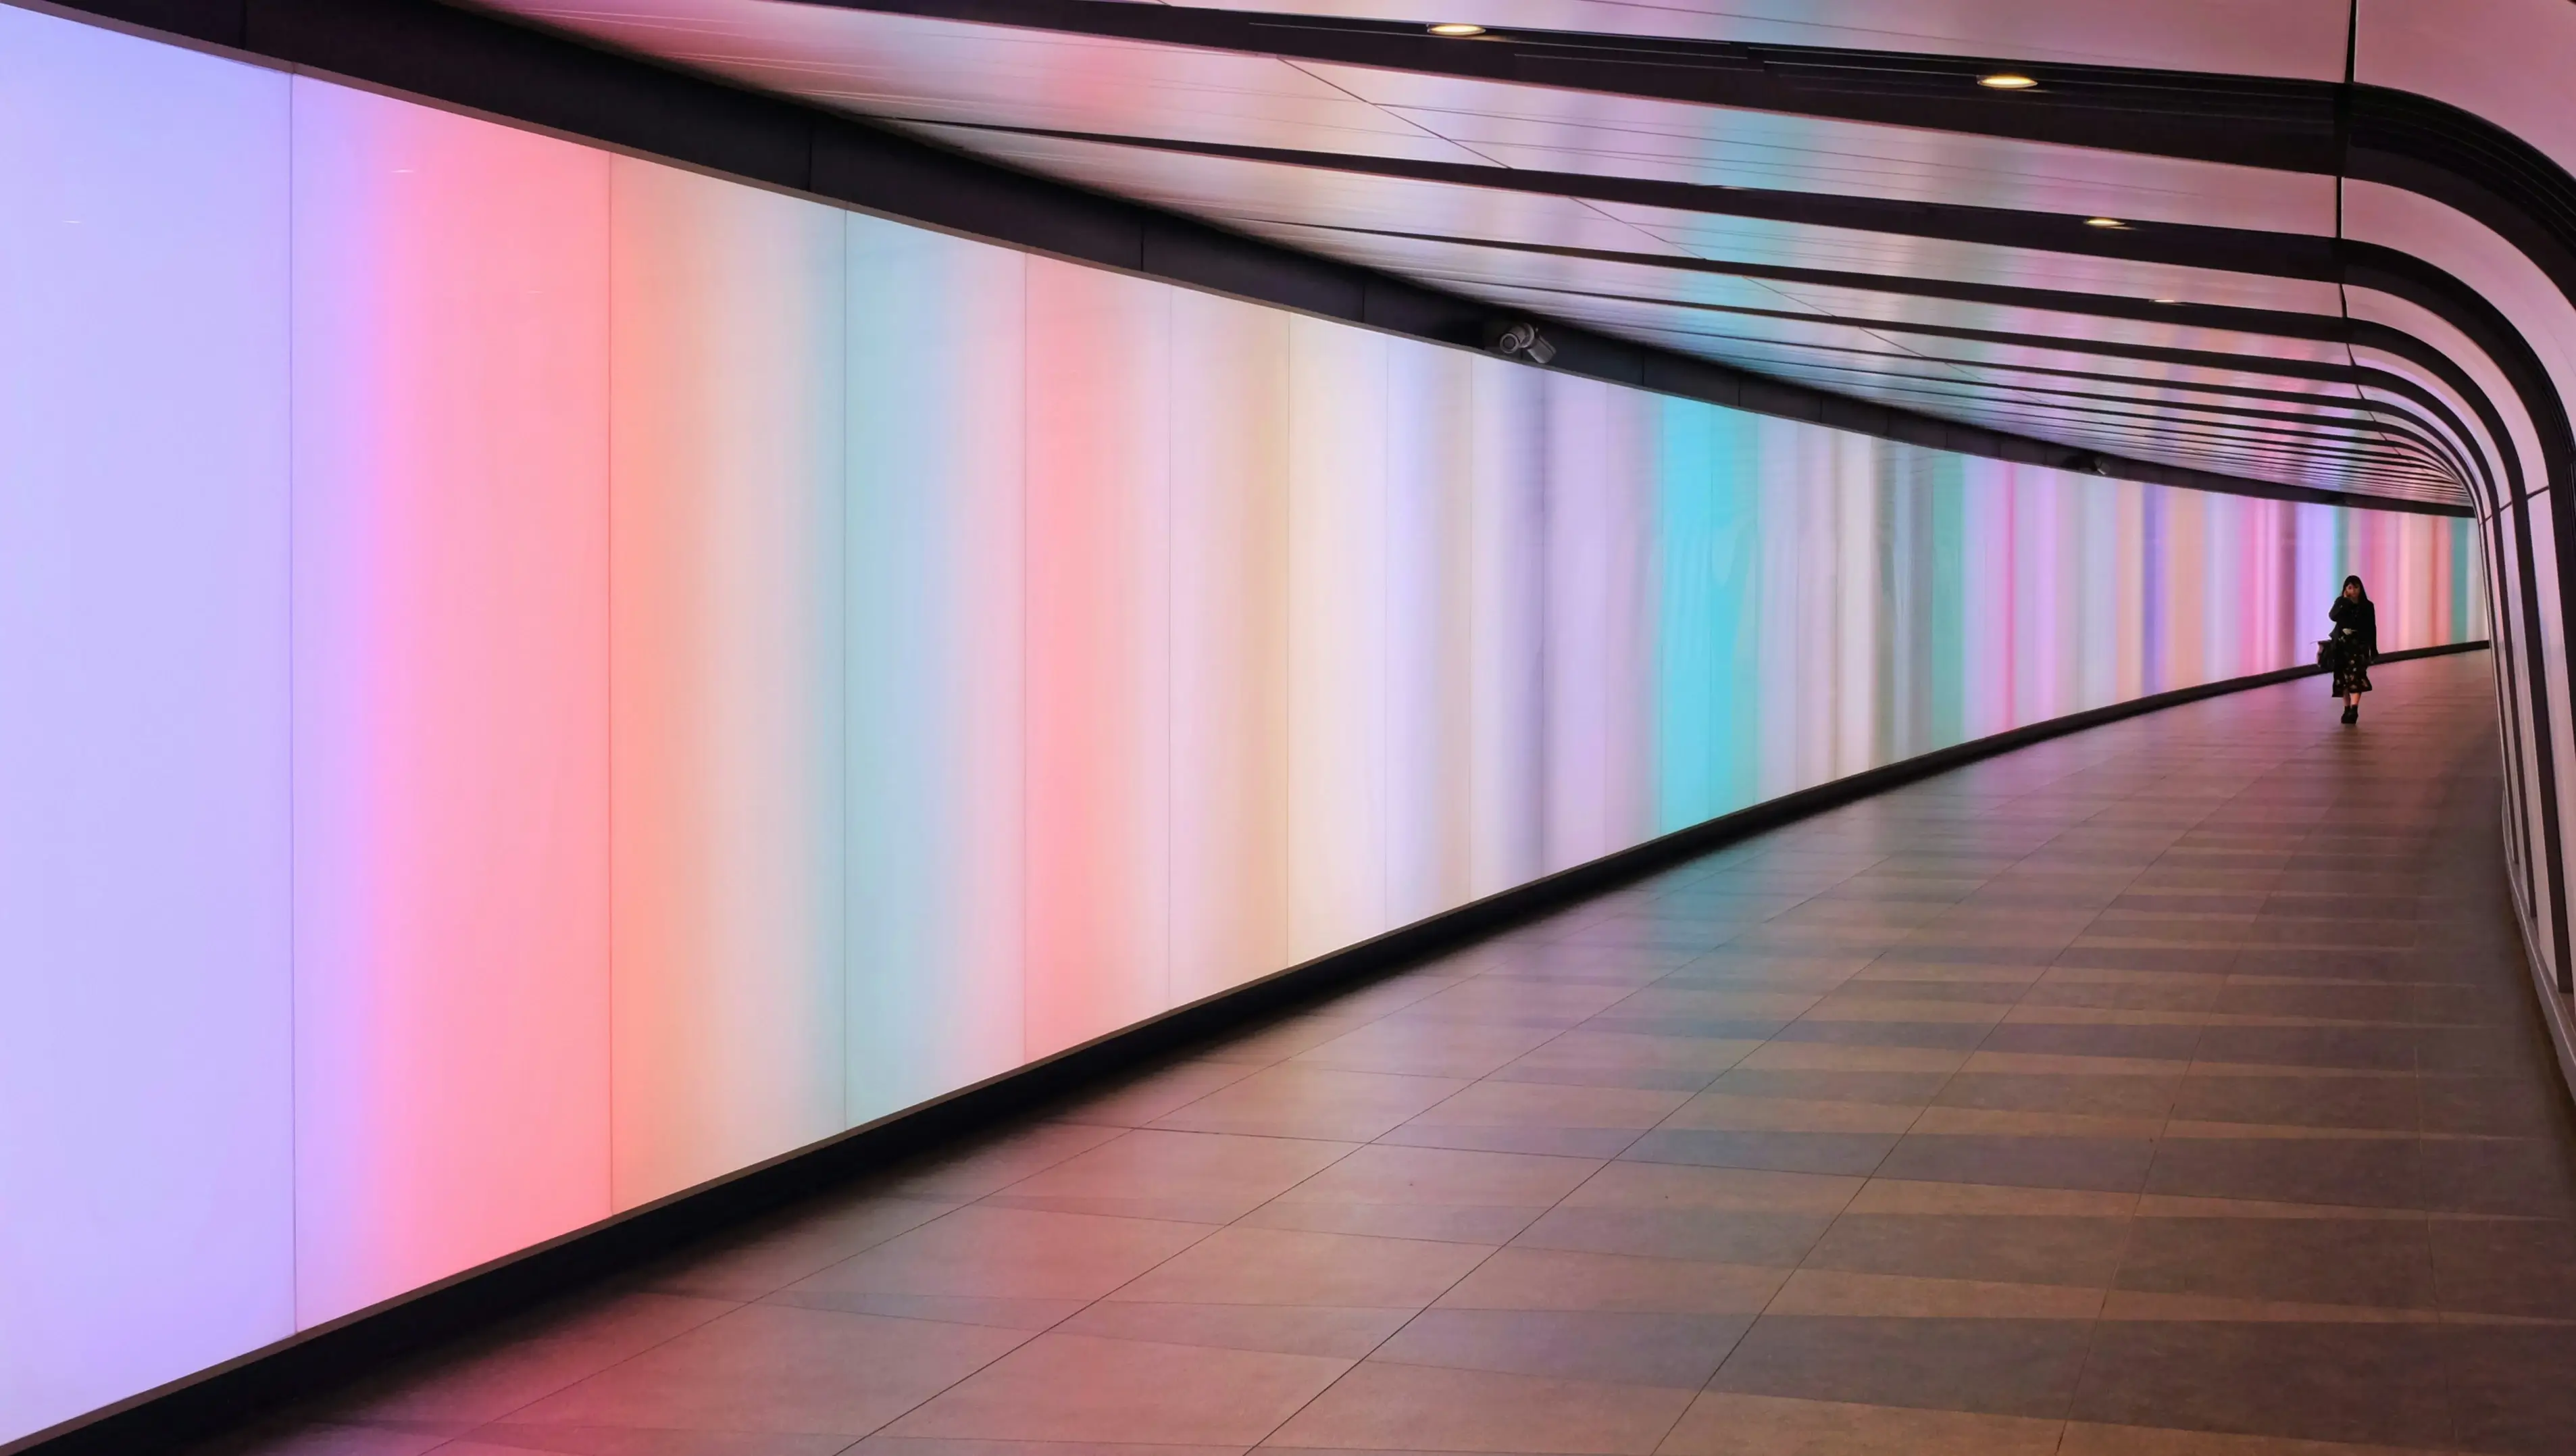 A lady walks along a long wall, captivated by the vibrant colors displayed on a stunning transparent LED screen.